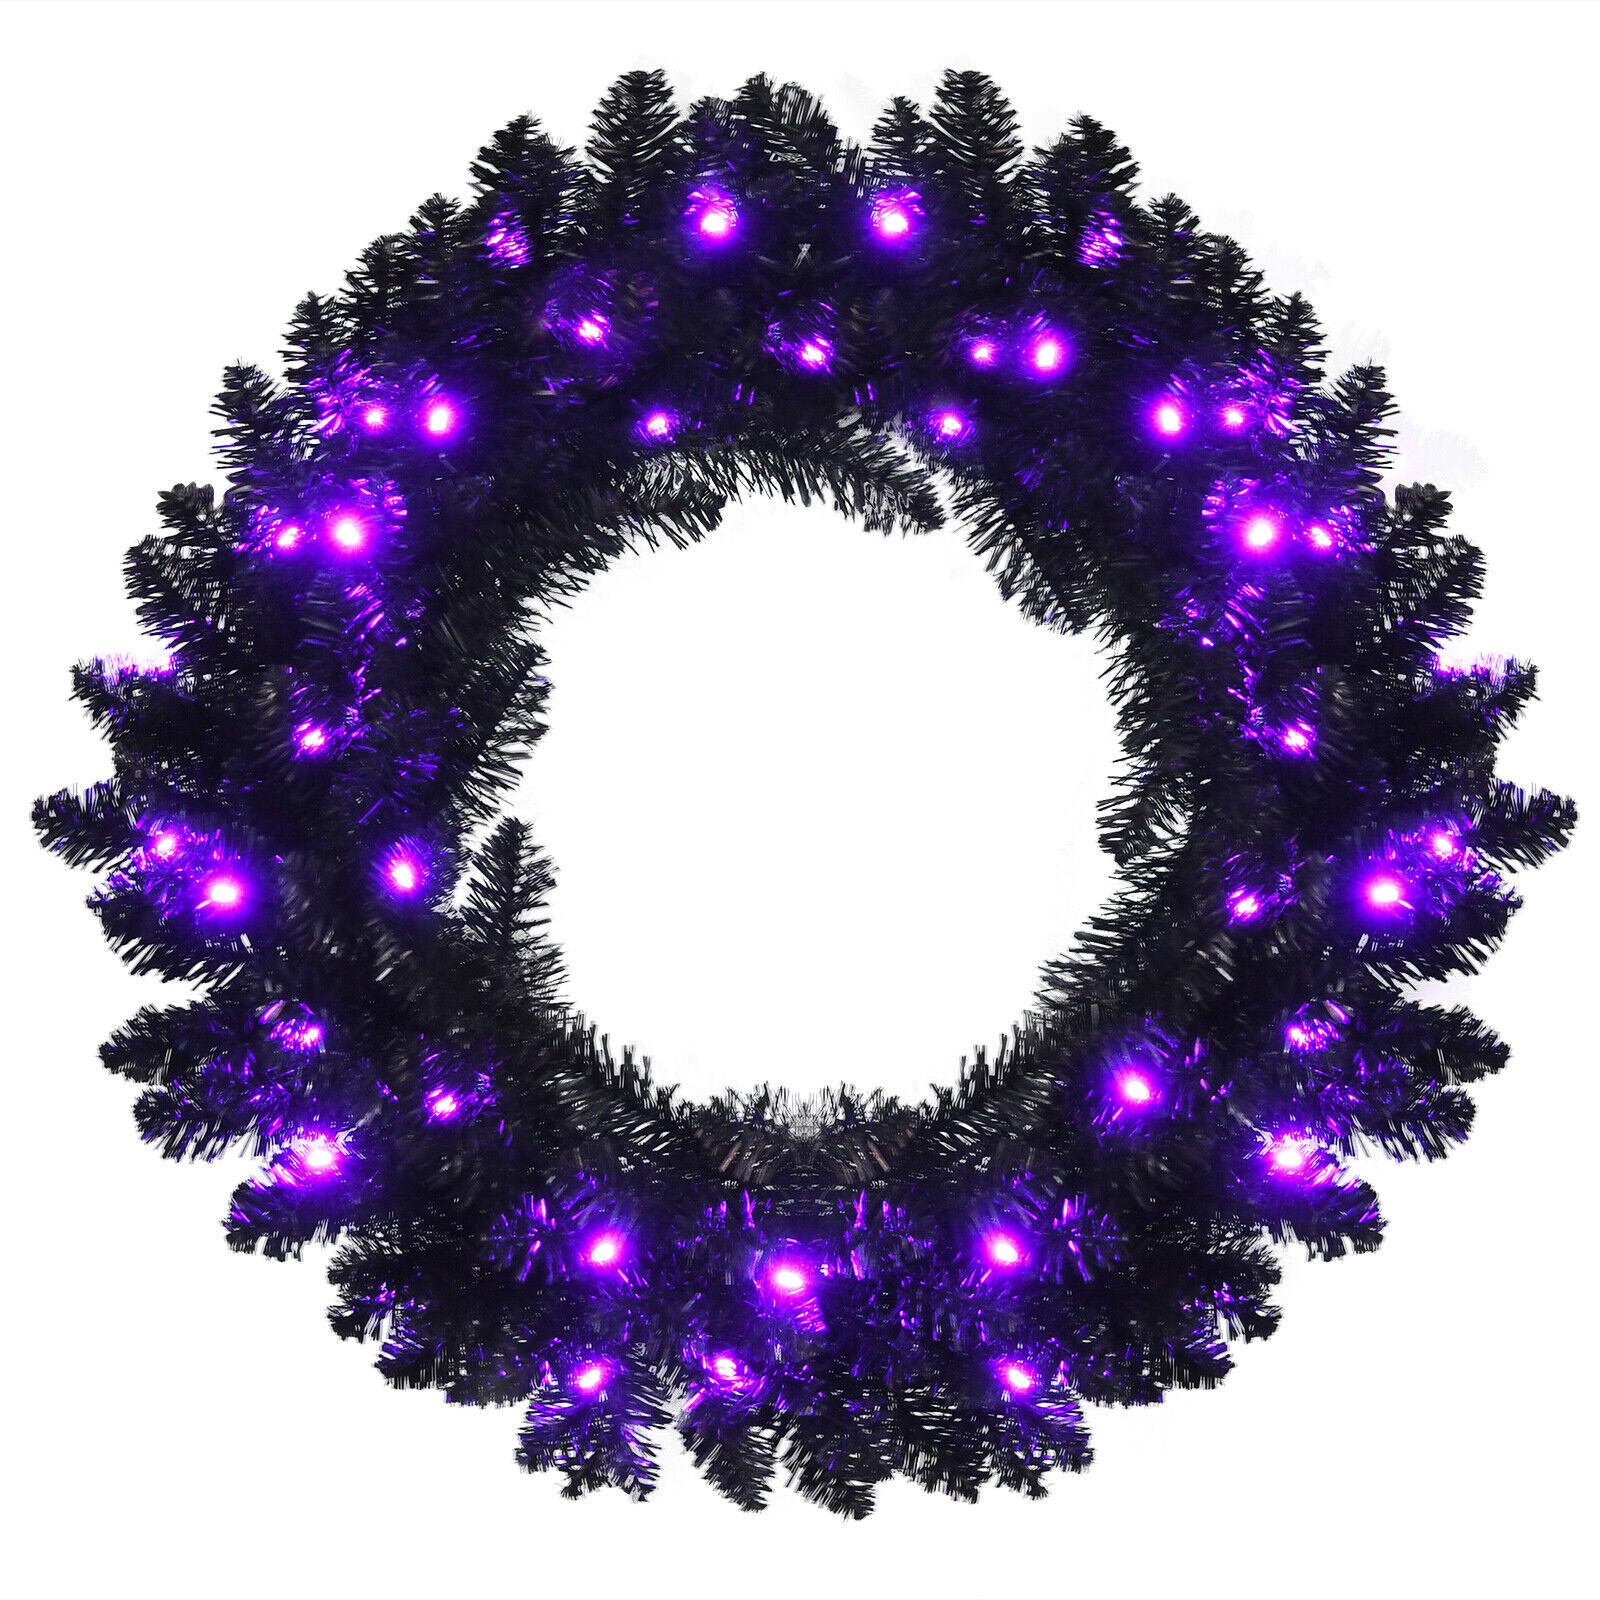 Primary image for Costway 24inch Pre-lit Christmas Halloween Wreath Black w/ 35 Purple LED Lights